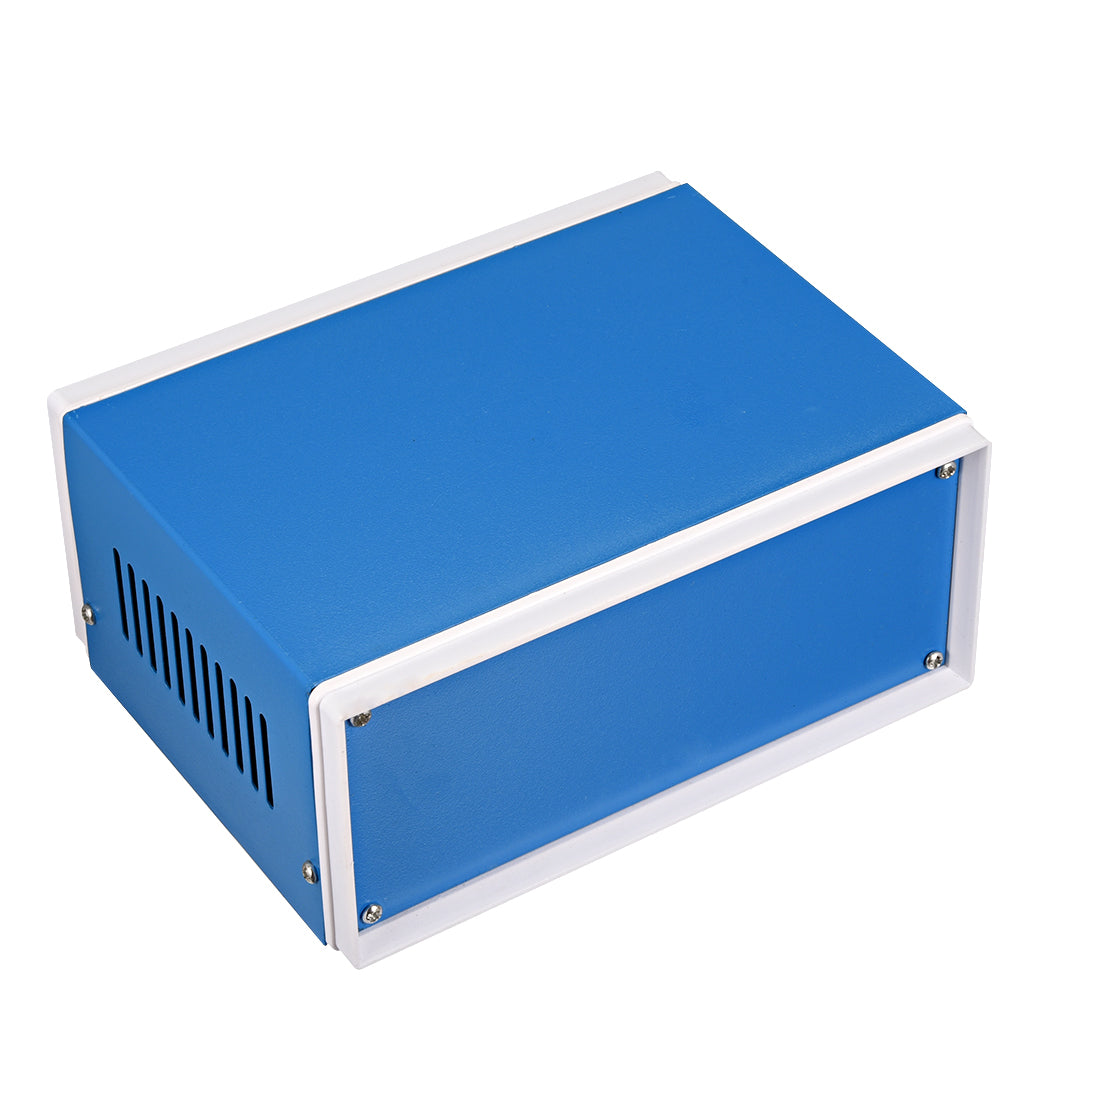 uxcell Uxcell Metal Blue Project Junction Box Enclosure Case 170 x 130 x 80mm/6.69 x 5.12 x 3.15inch